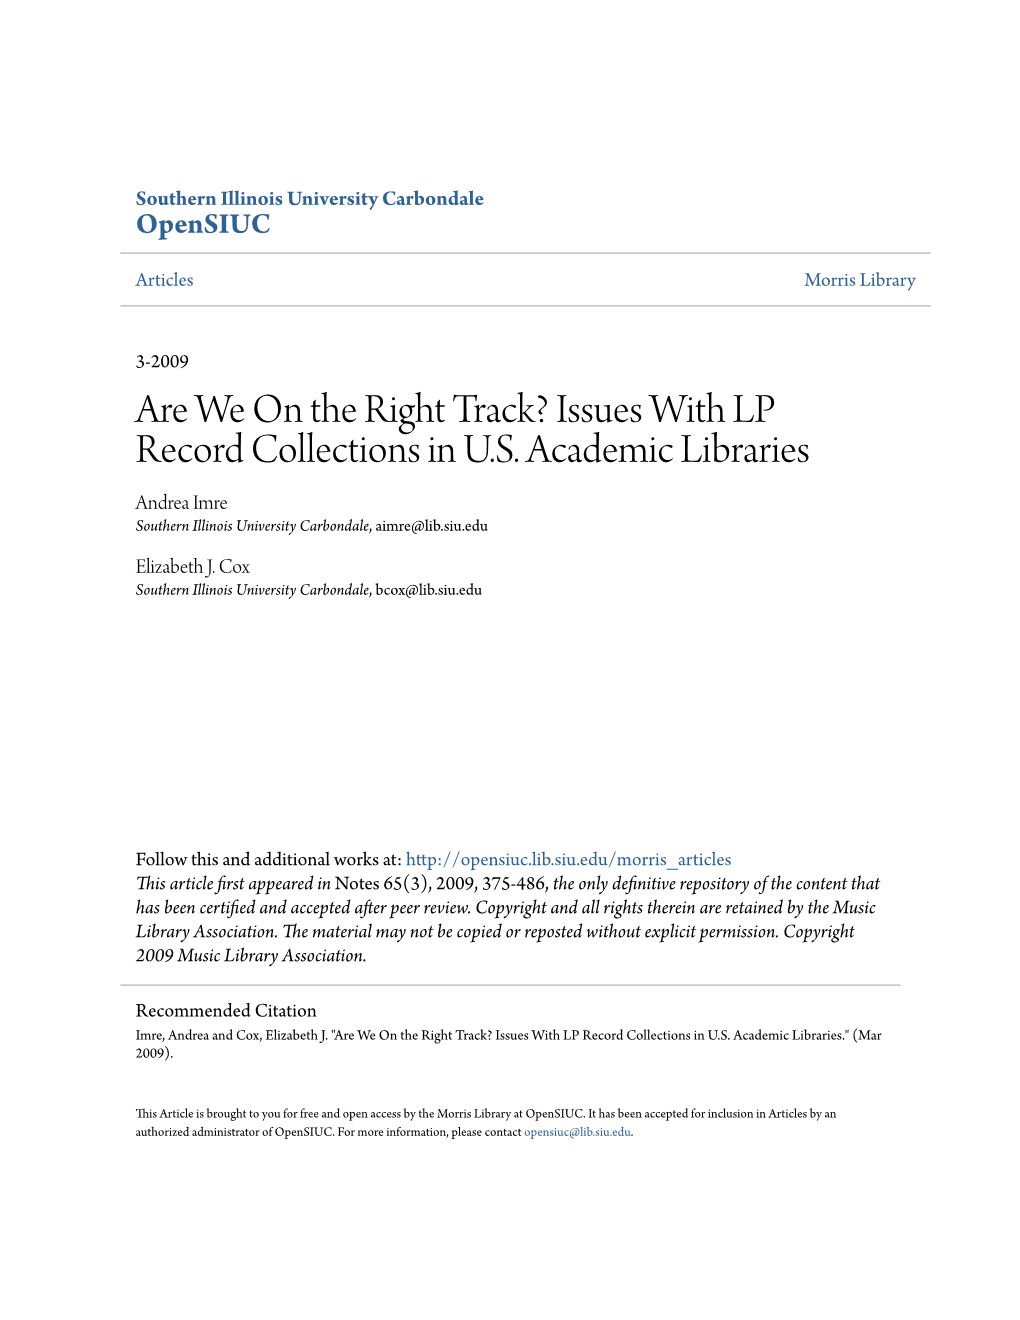 Issues with LP Record Collections in US Academic Libraries